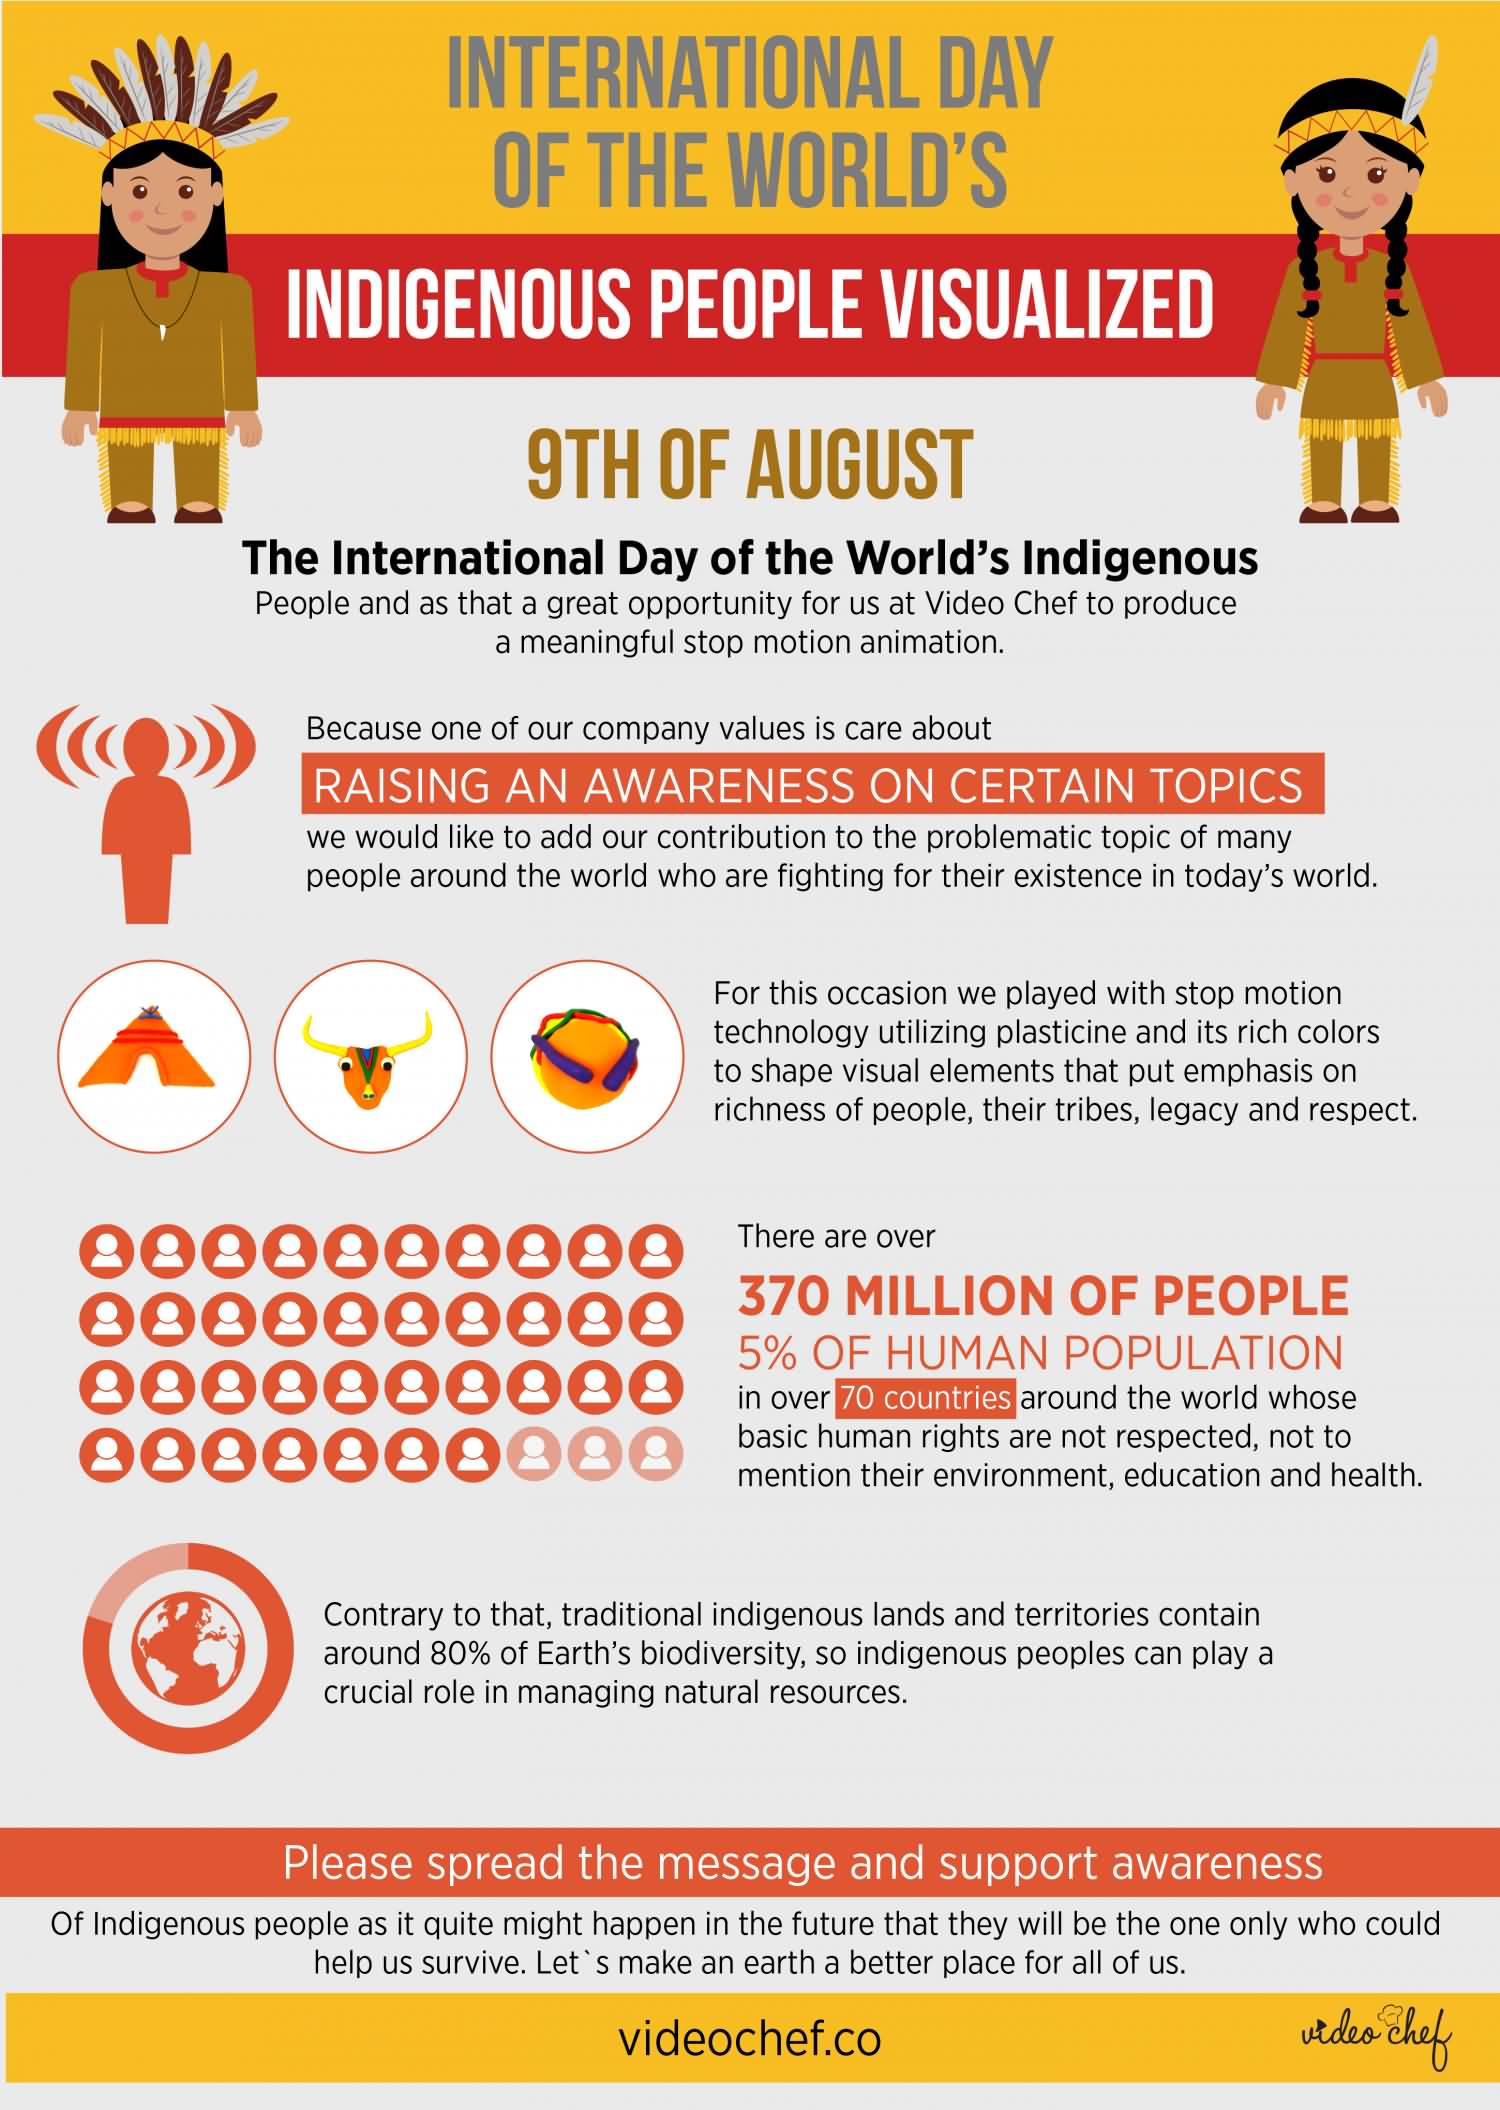 International Day Of The World’s Indigenous People Visualized 9th Of Augst